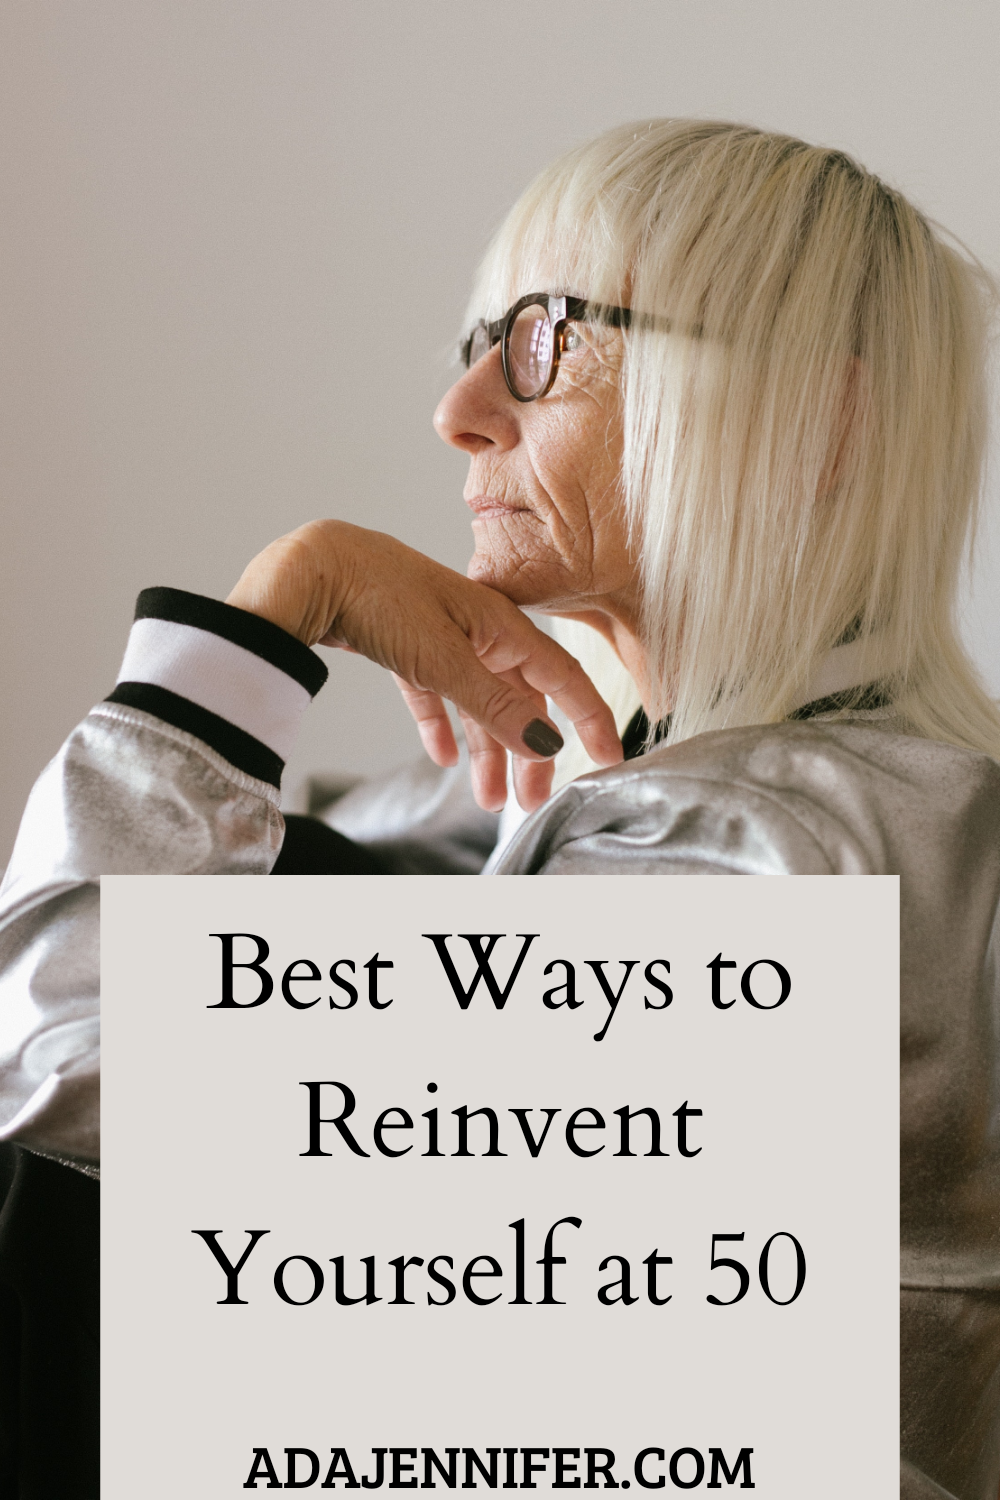 How to reinvent yourself physically